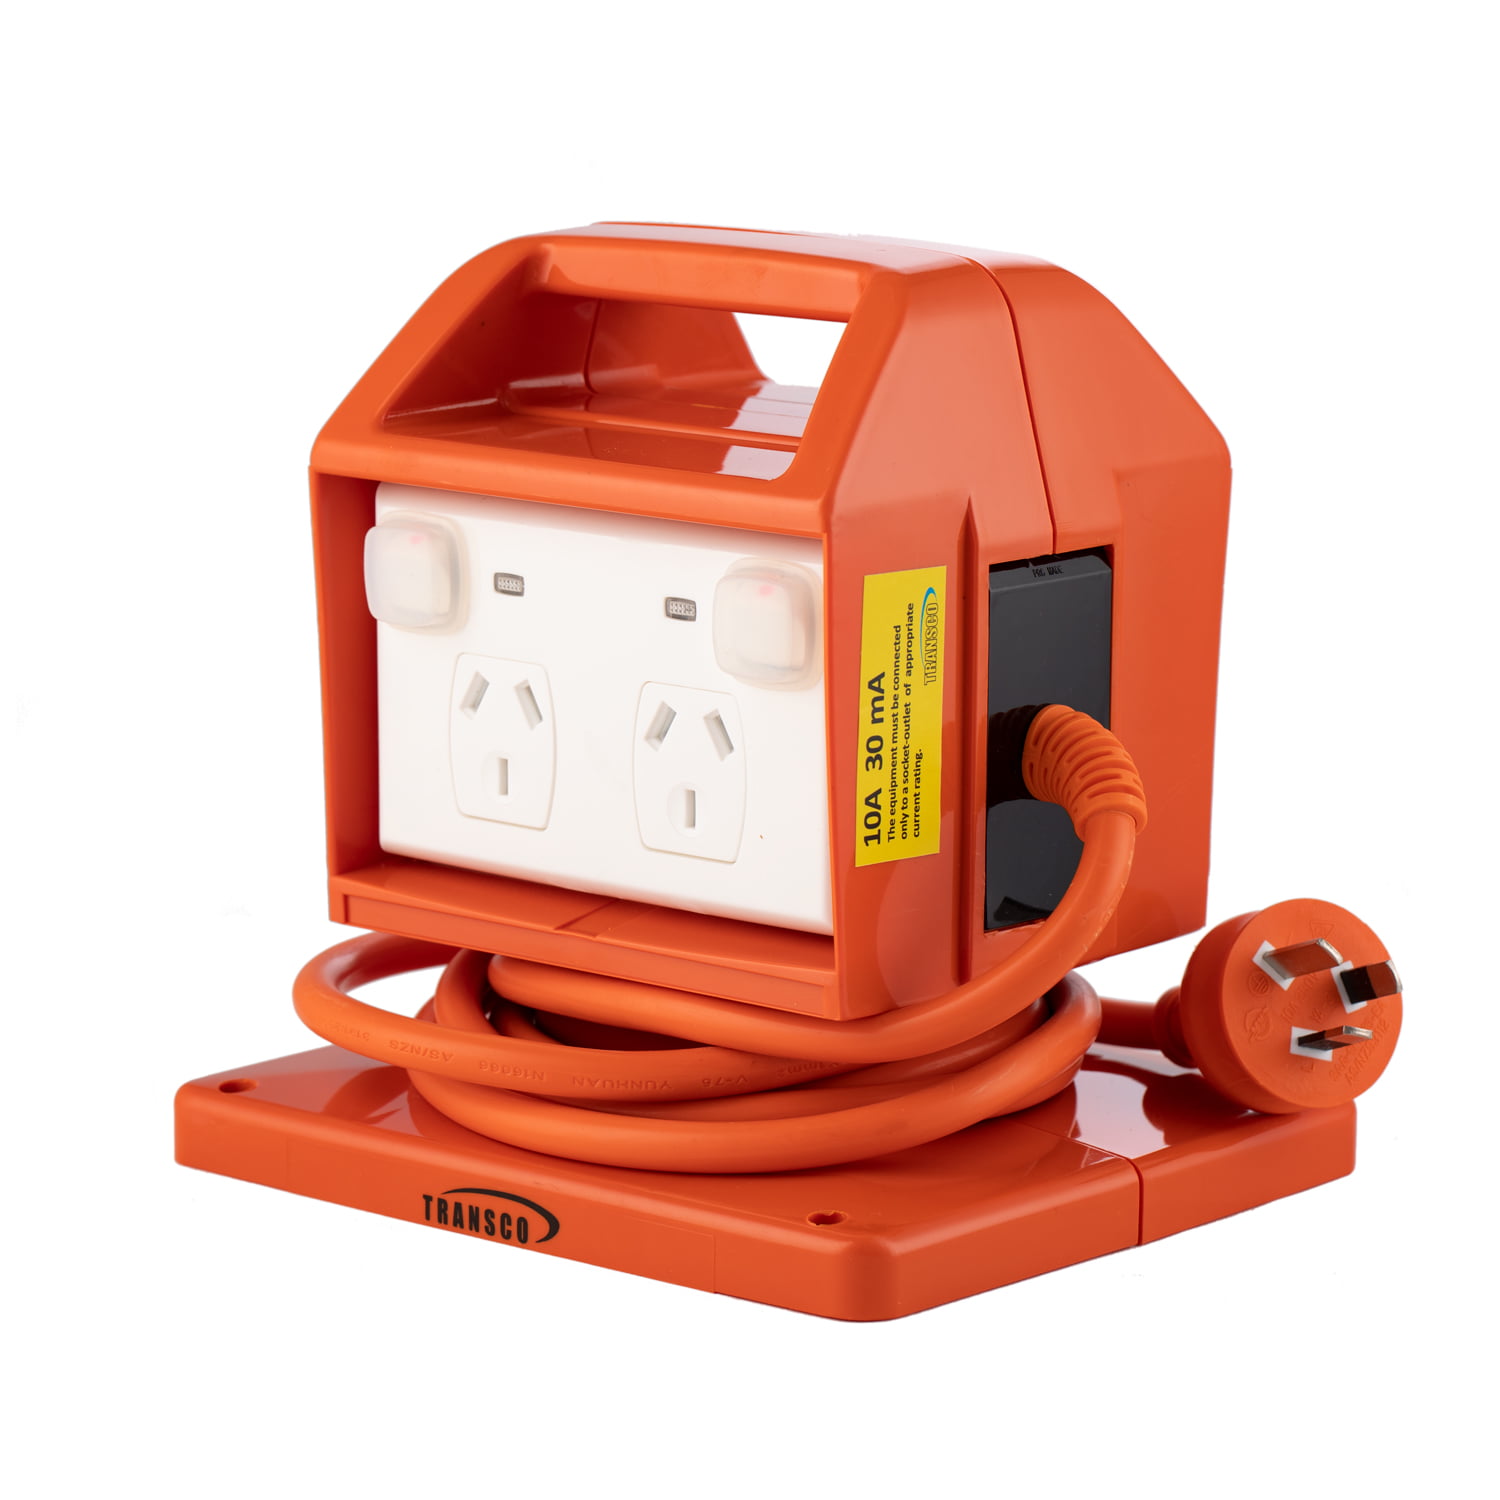 RCBO Protected Weatherproof IP53 RCDMCB Portable Power Outlet Class H